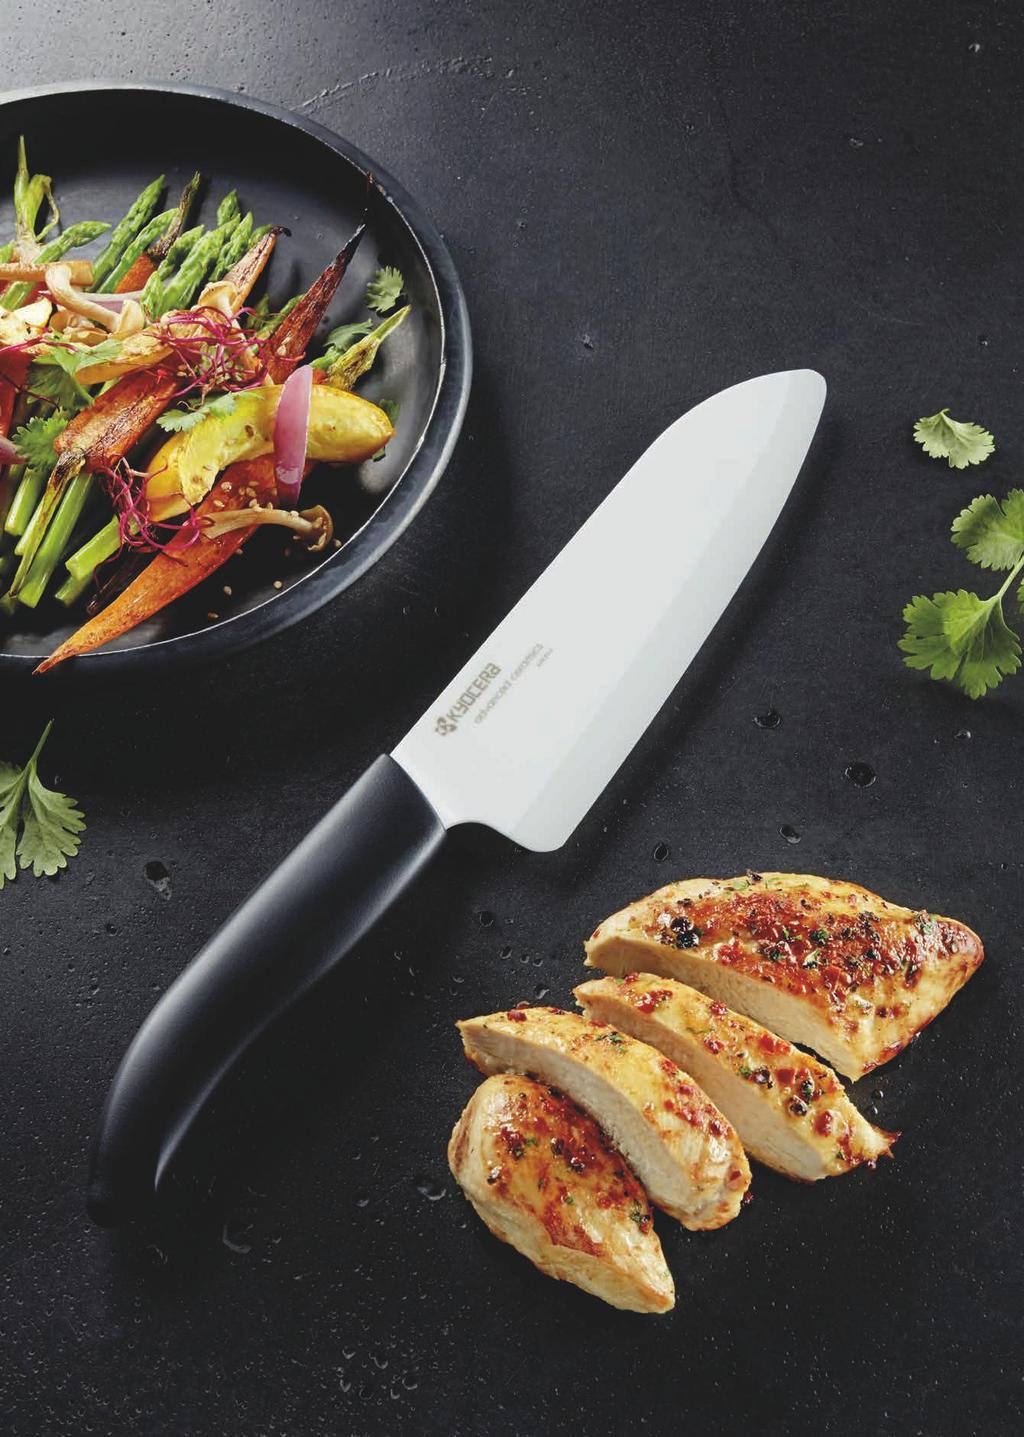 26 Gen Series 27 PURISM AT ITS BEST Gen Series The Ultimate These knives are the ultimate cutting tools and essential in any kitchen.